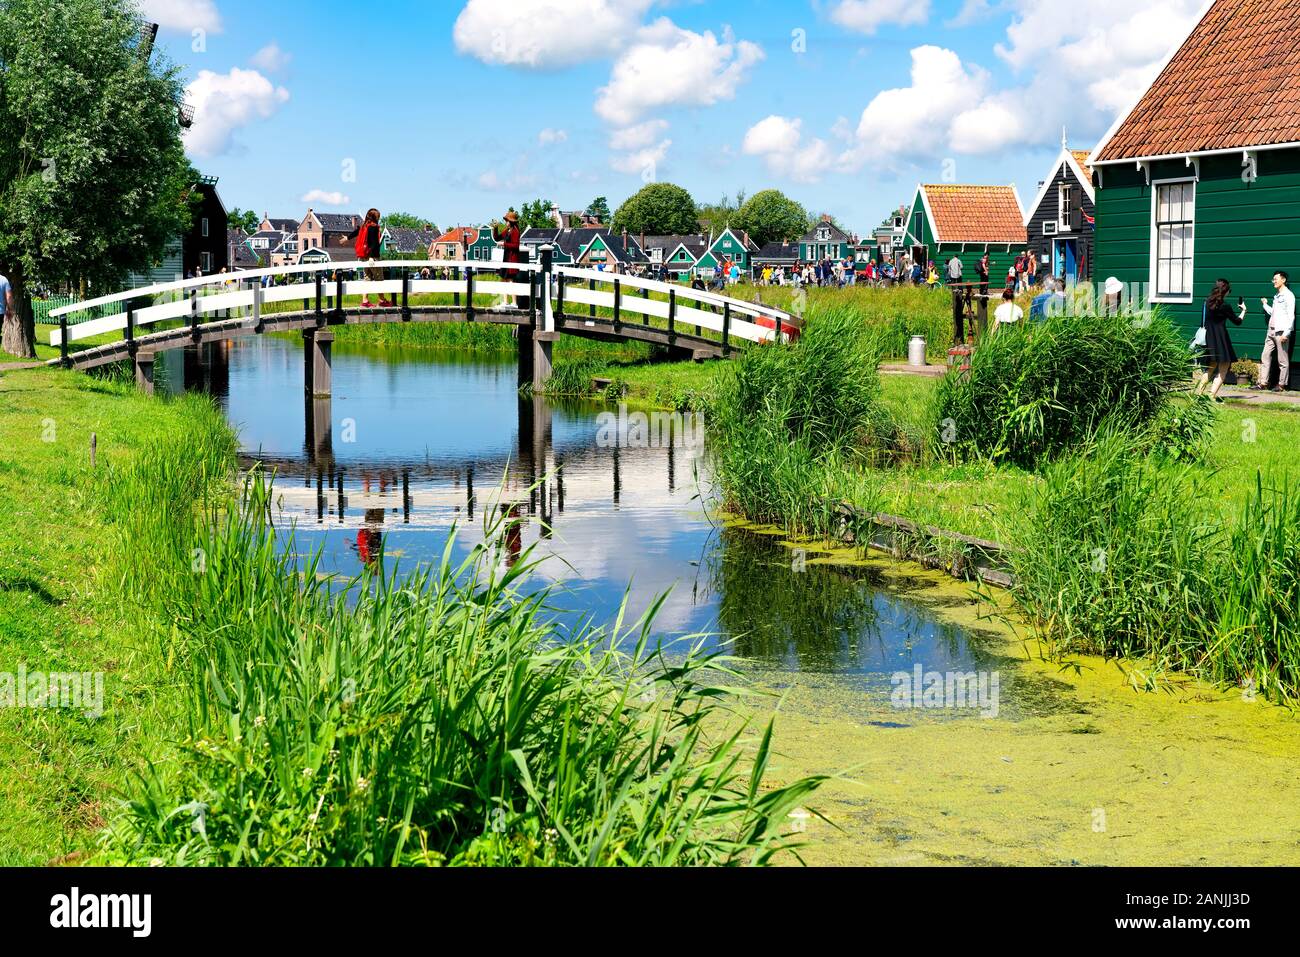 Netherlands, 06/2019: Zaanse Schans is one of the popular tourist attractions of the Netherlands. Stock Photo